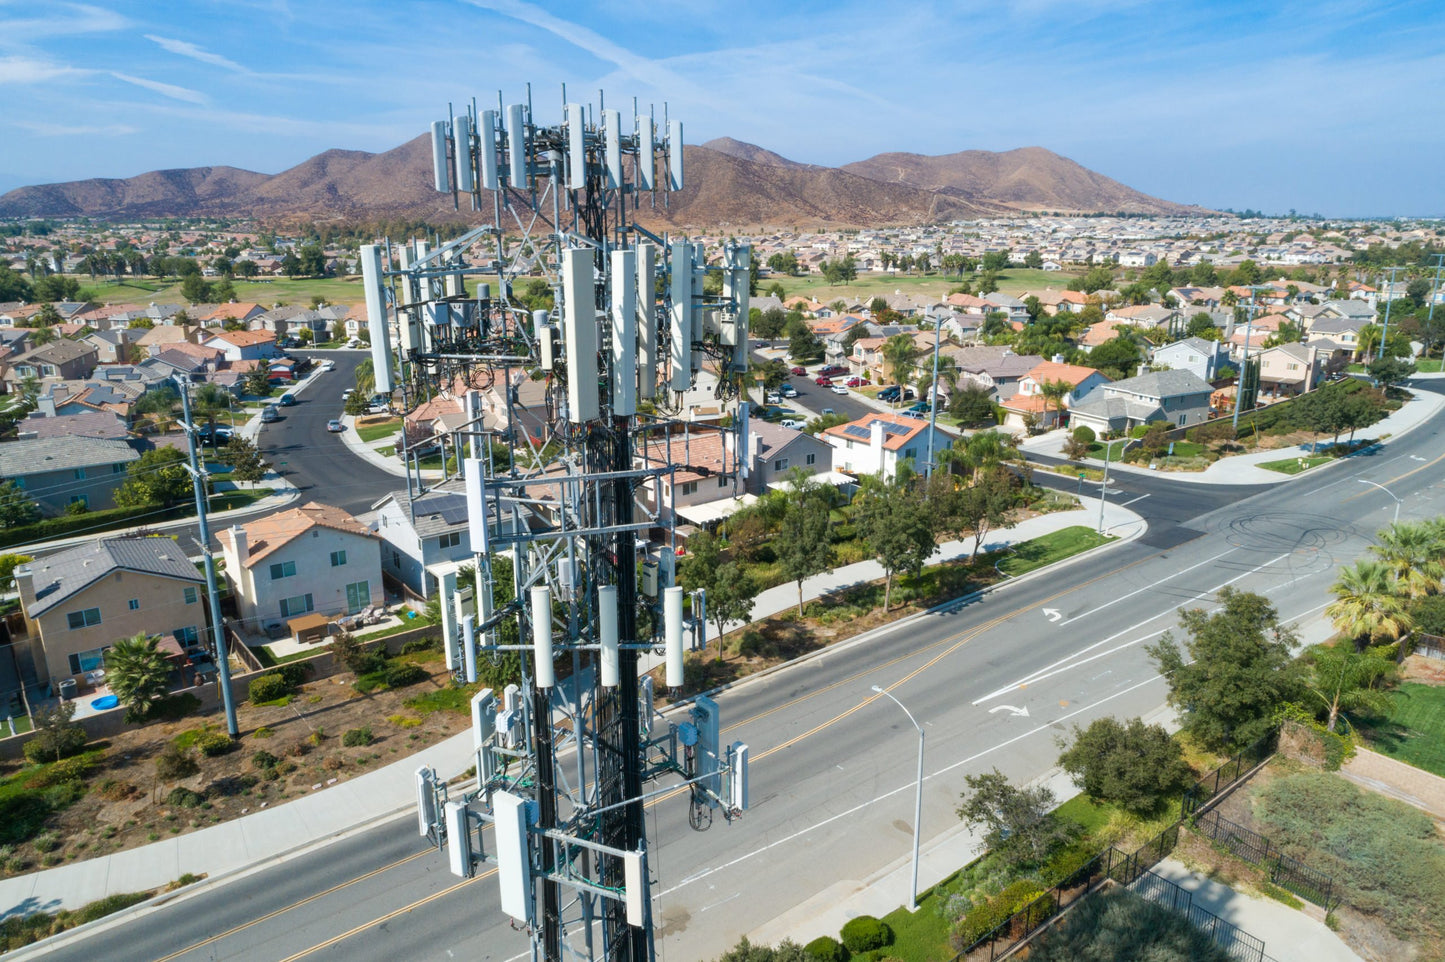 Photo of a 5G tower overlooking a populated suburban area|Photo of 5G antennas on top of a building